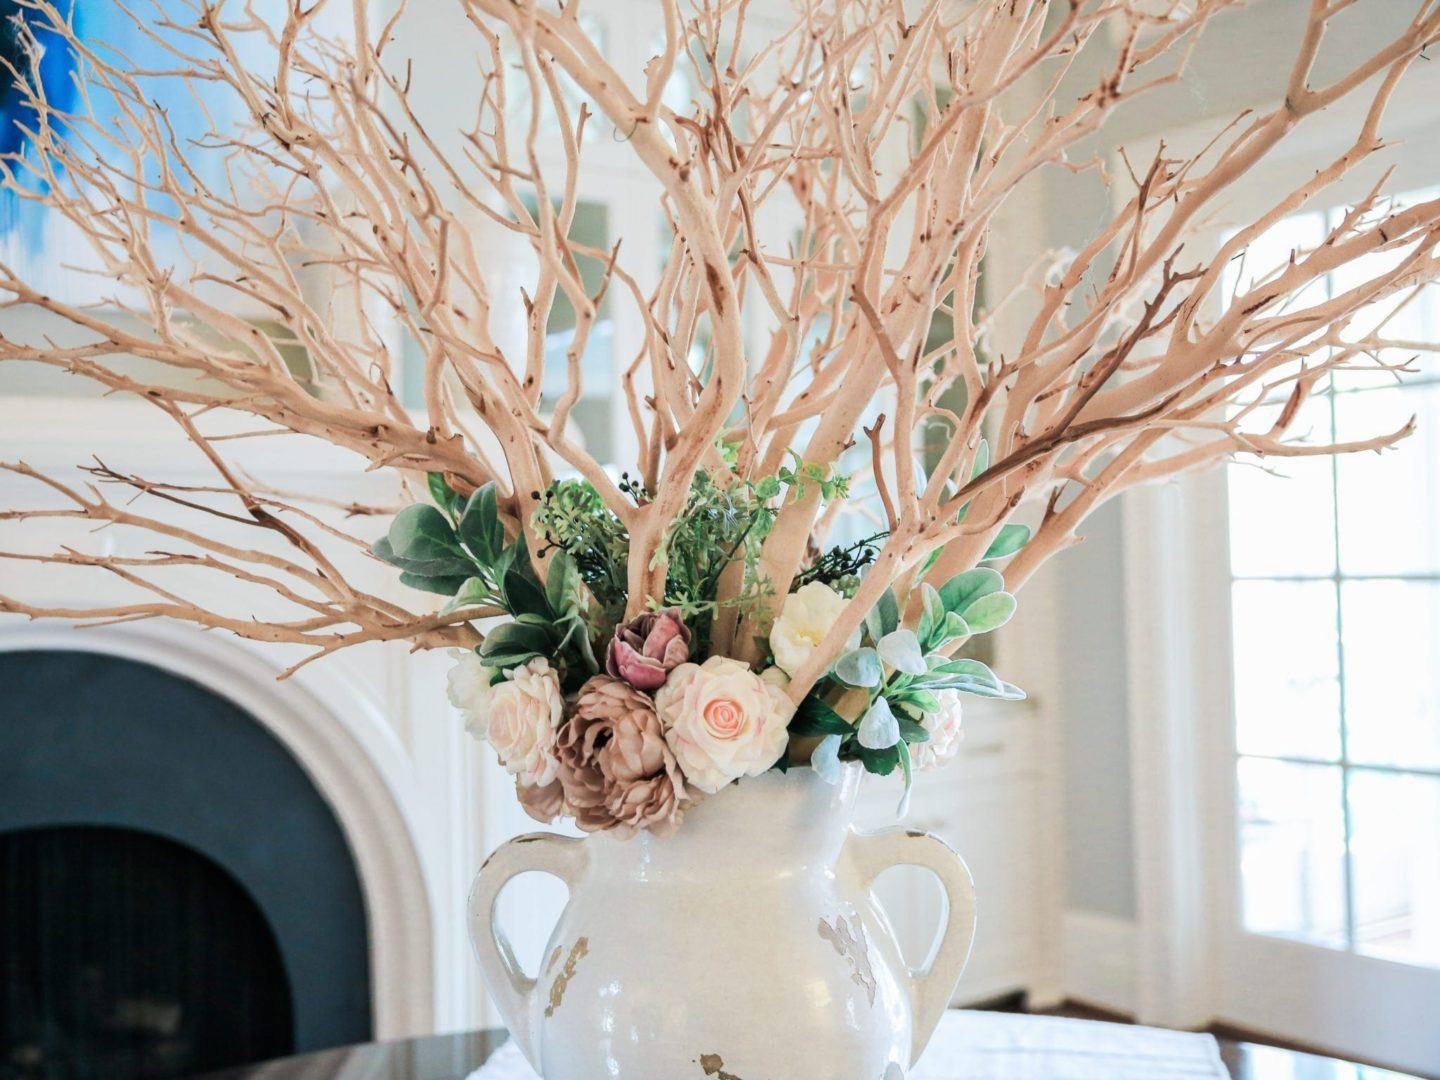 fake flowers that look real in vase using manzanita stick branches and roses.